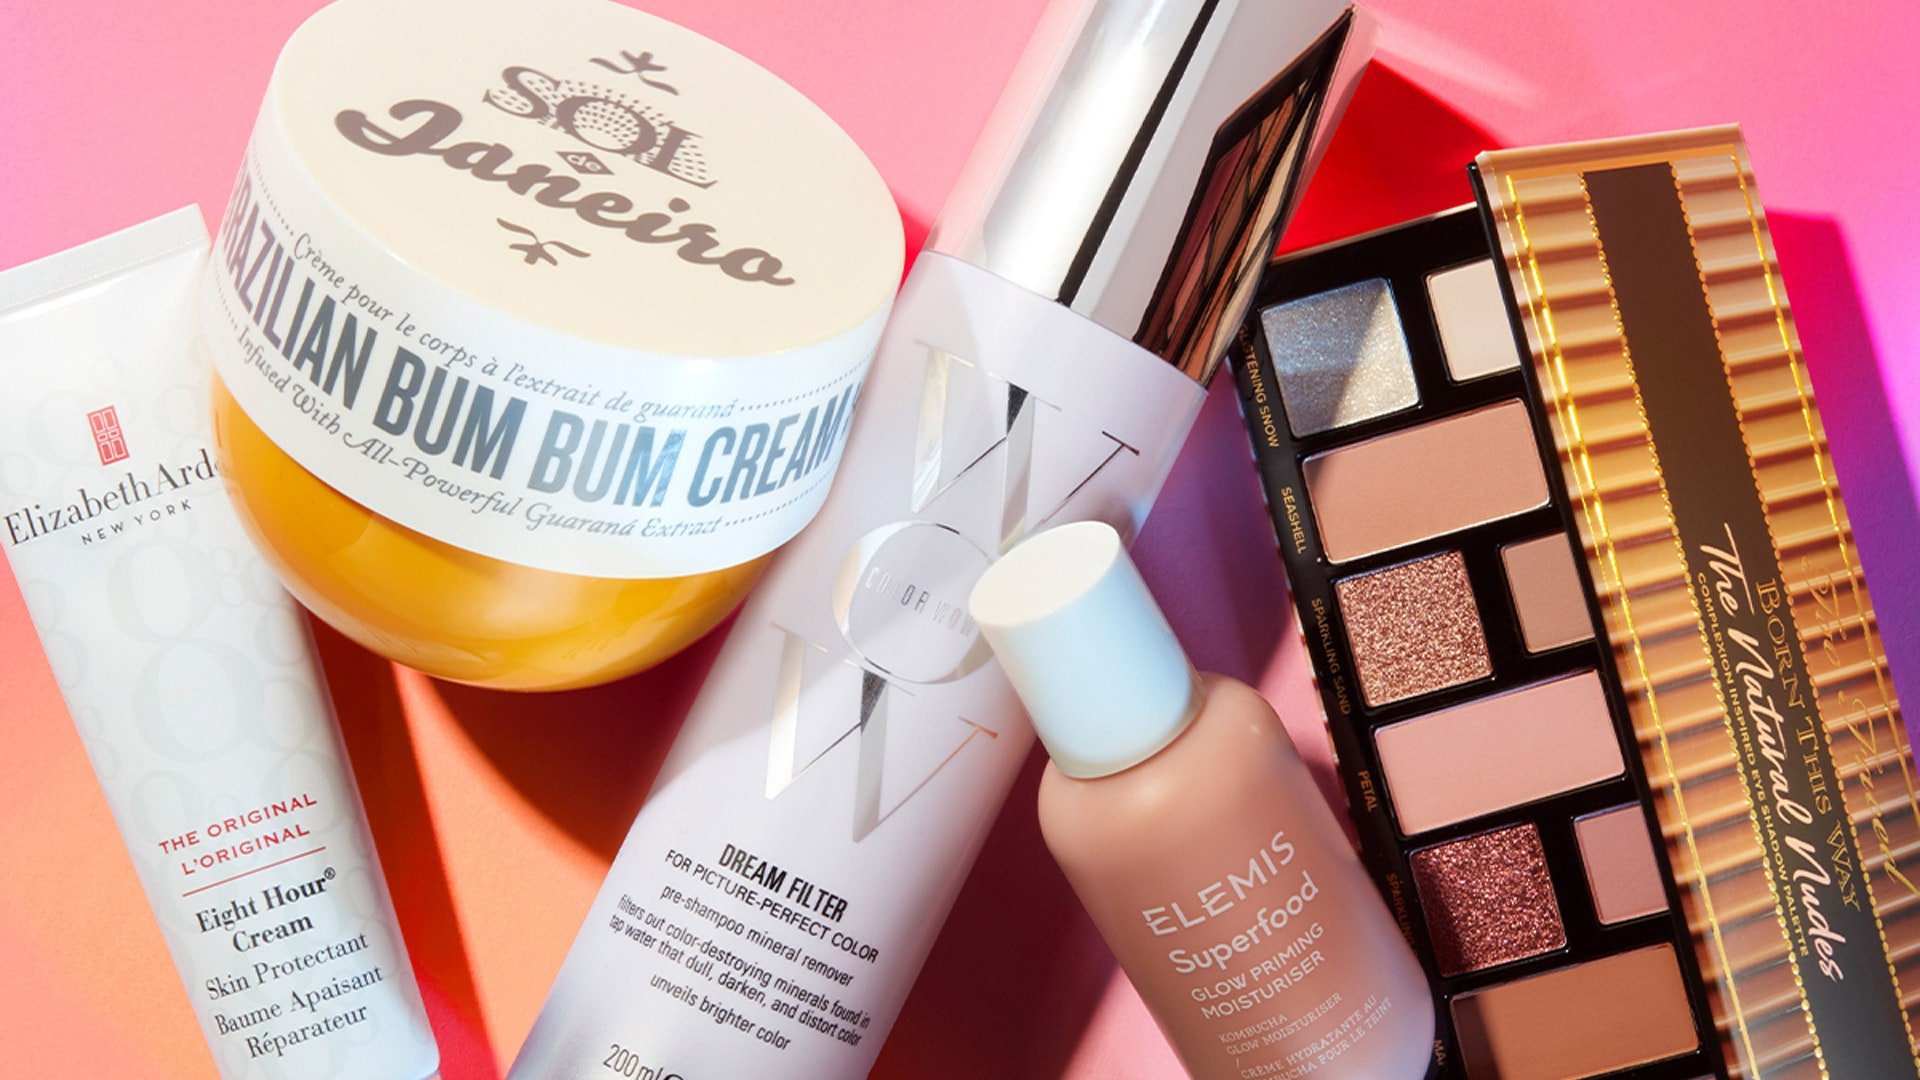 61 Cyber Monday beauty deals to shop before they're gone – across makeup, skincare, hair tools and fragrance